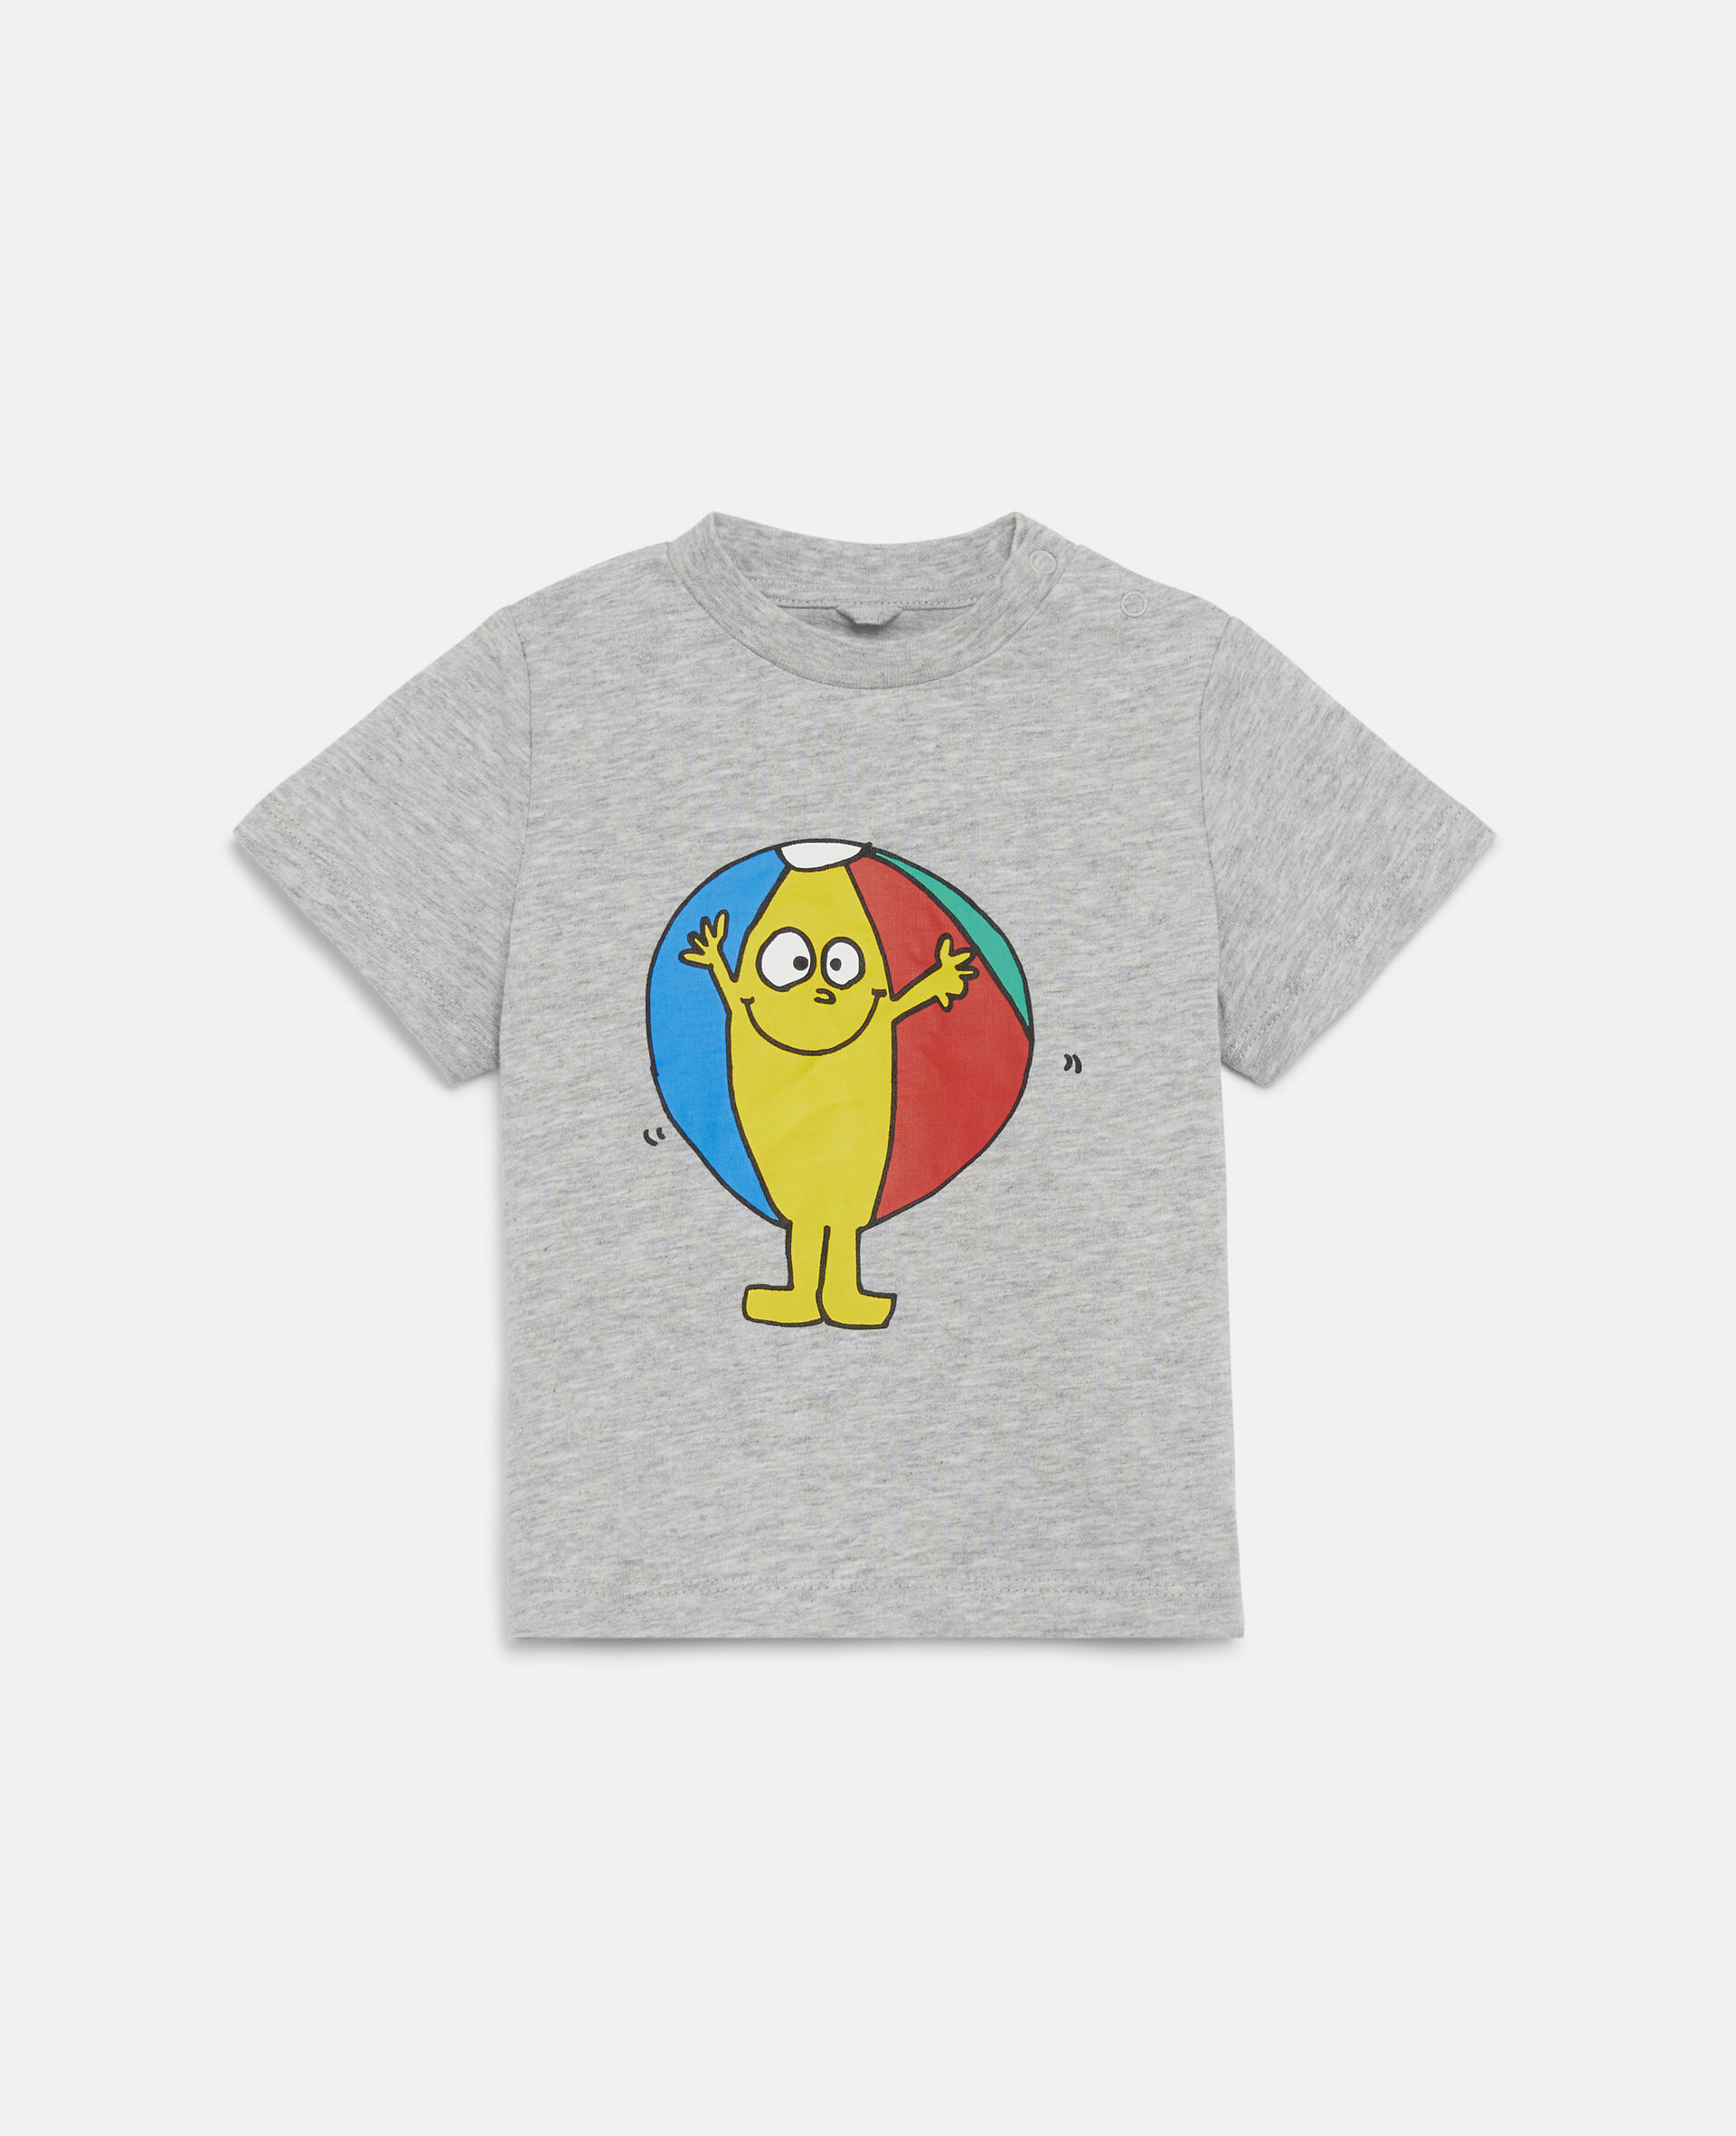 Beachball Cotton T-Shirt-Grey-large image number 0